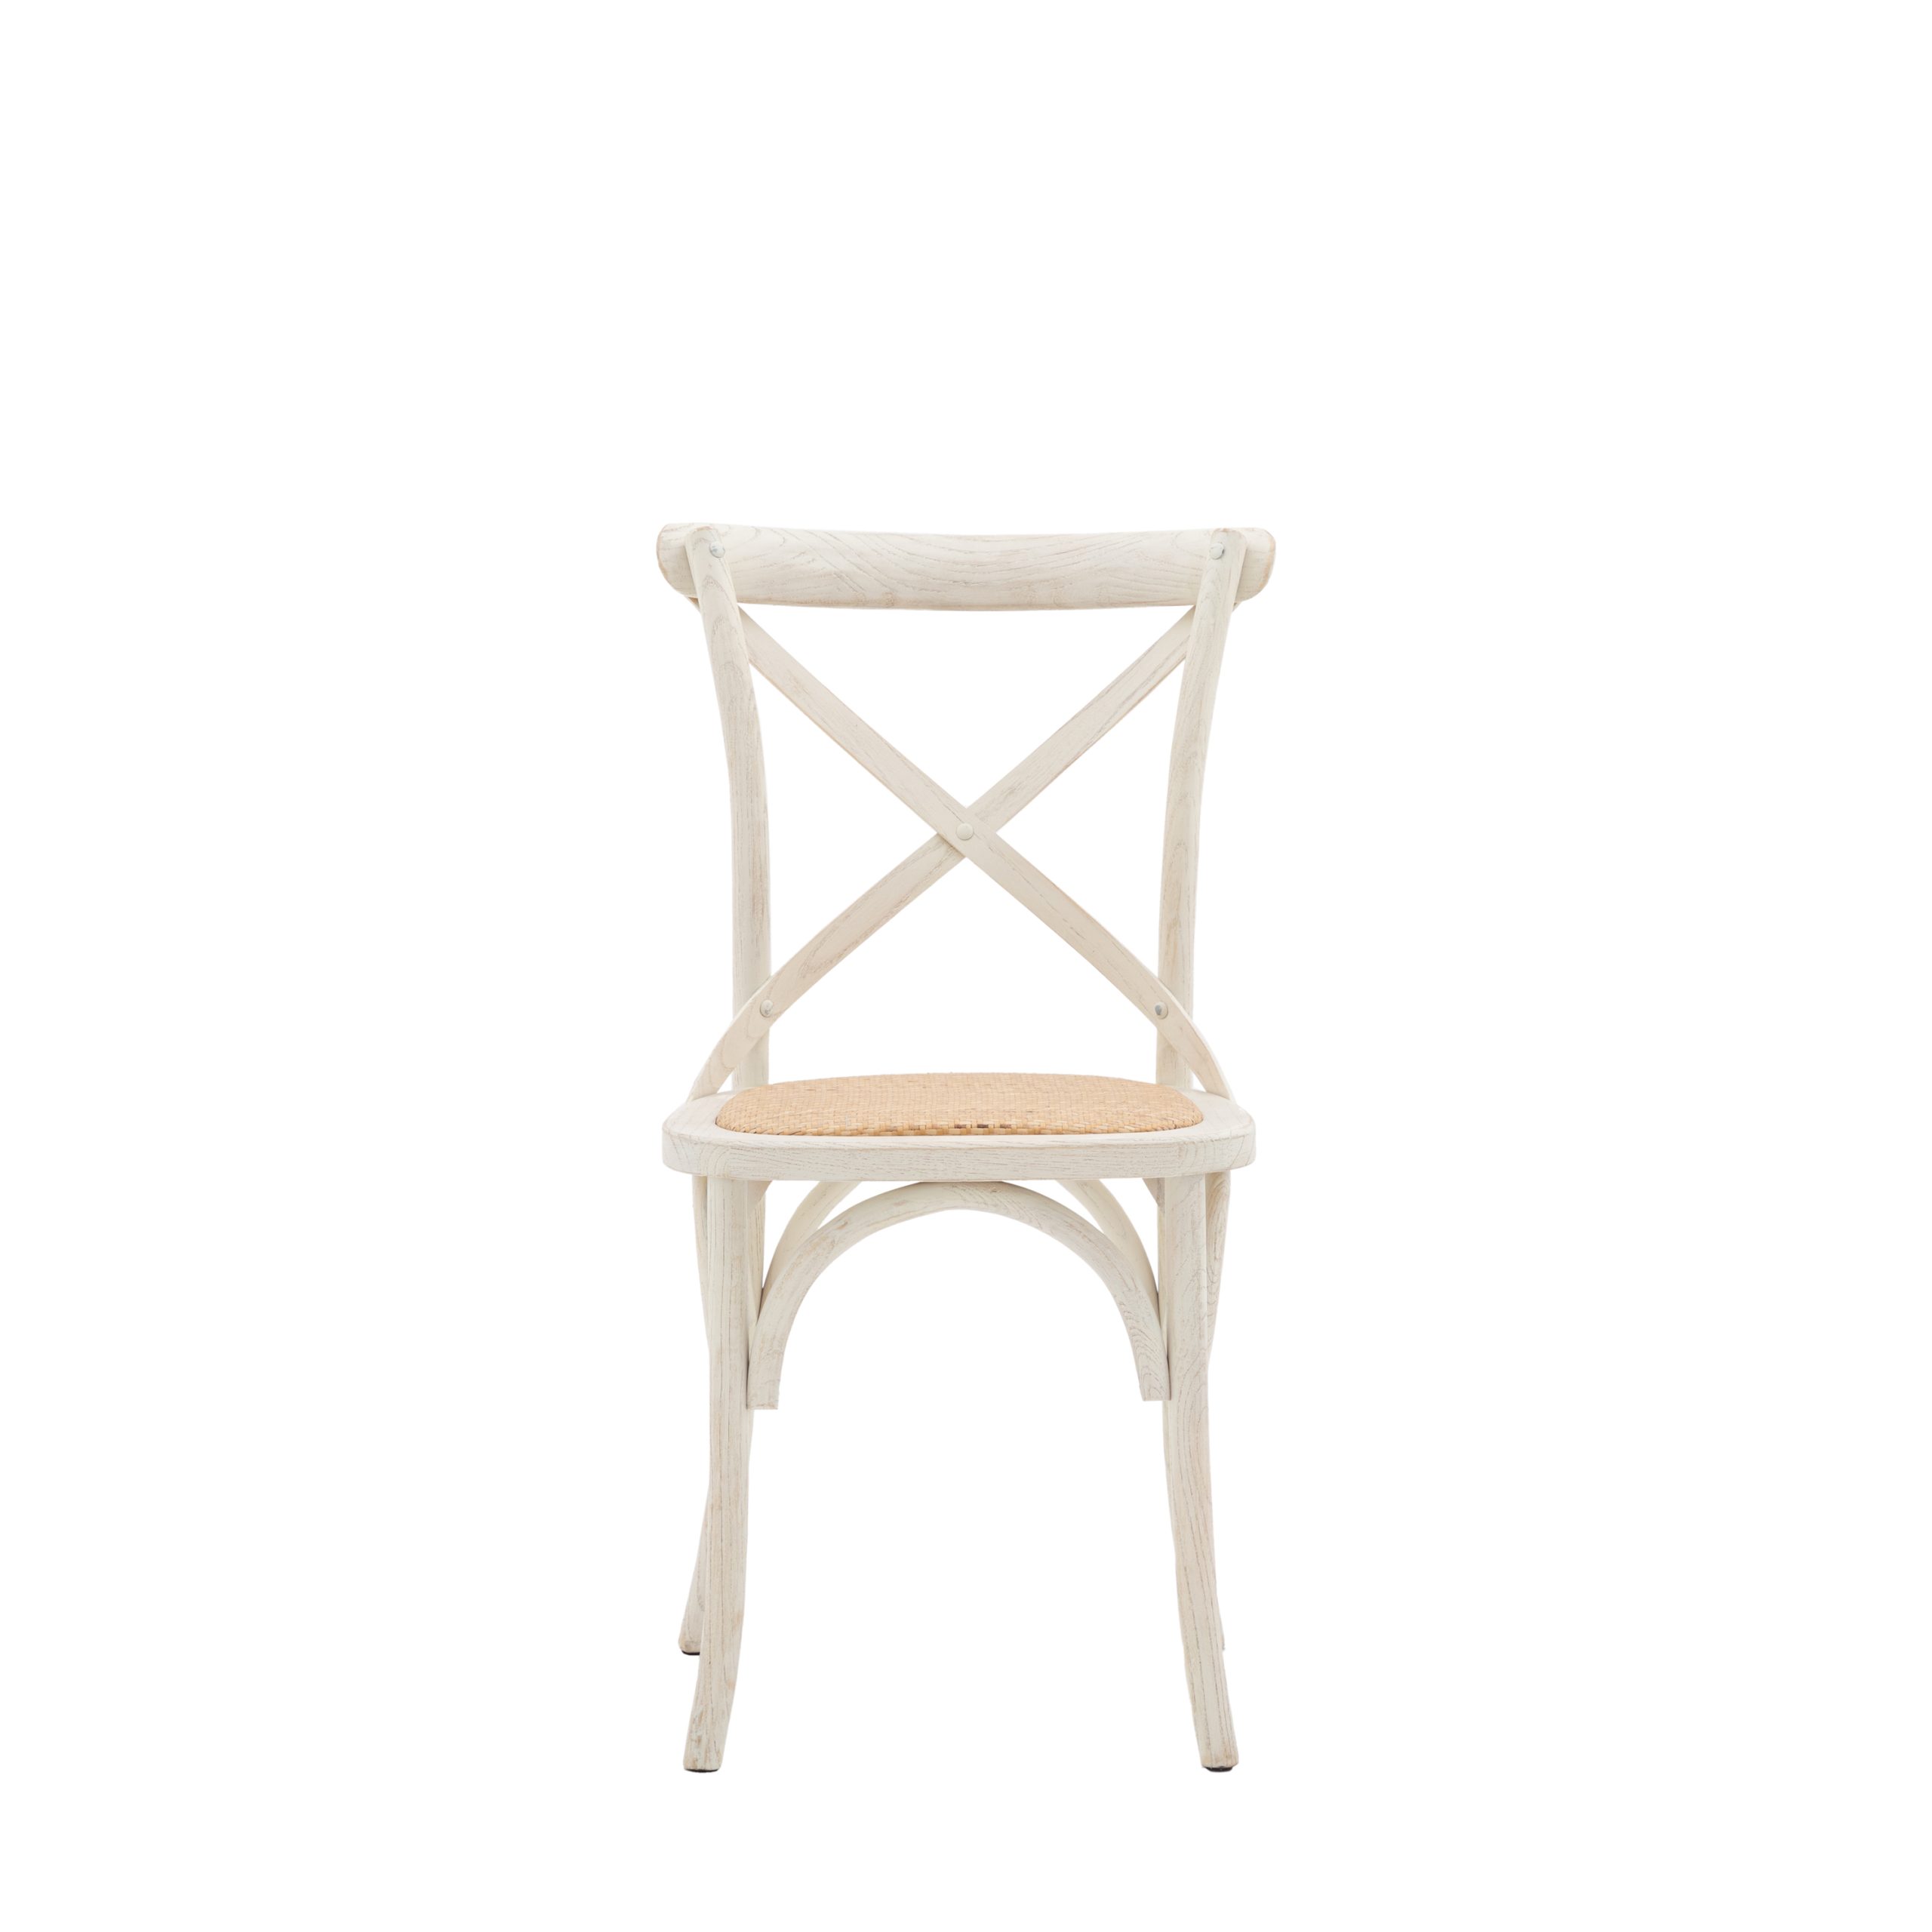 Gallery Direct Cafe Chair White/Rattan (Set of 2)